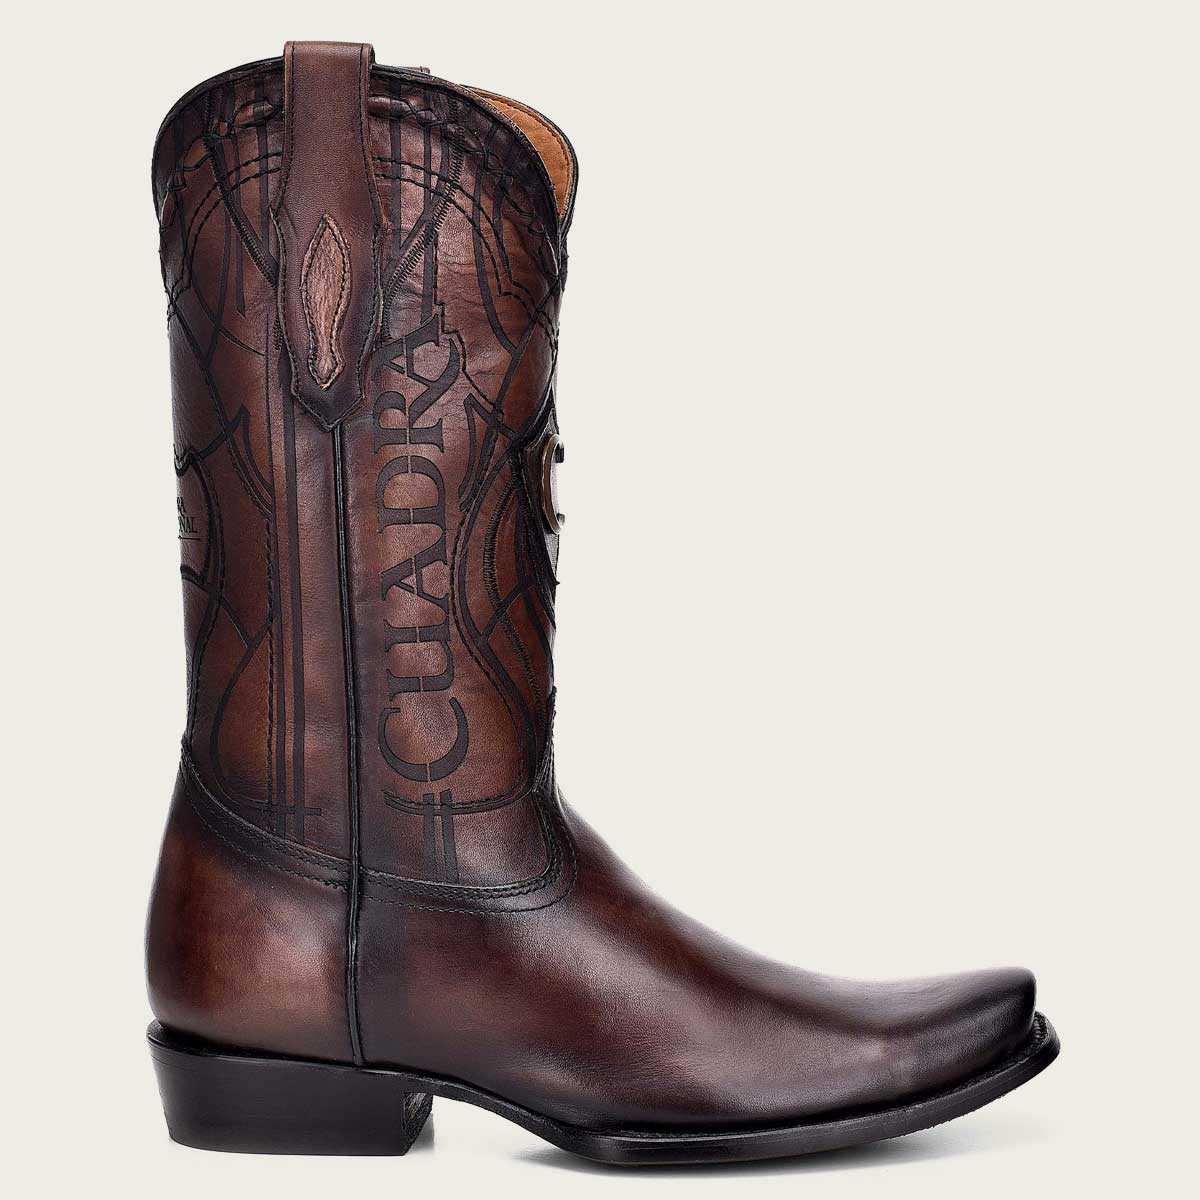 This boot showcases a meticulously hand-painted finish that exudes sophistication and artistry.